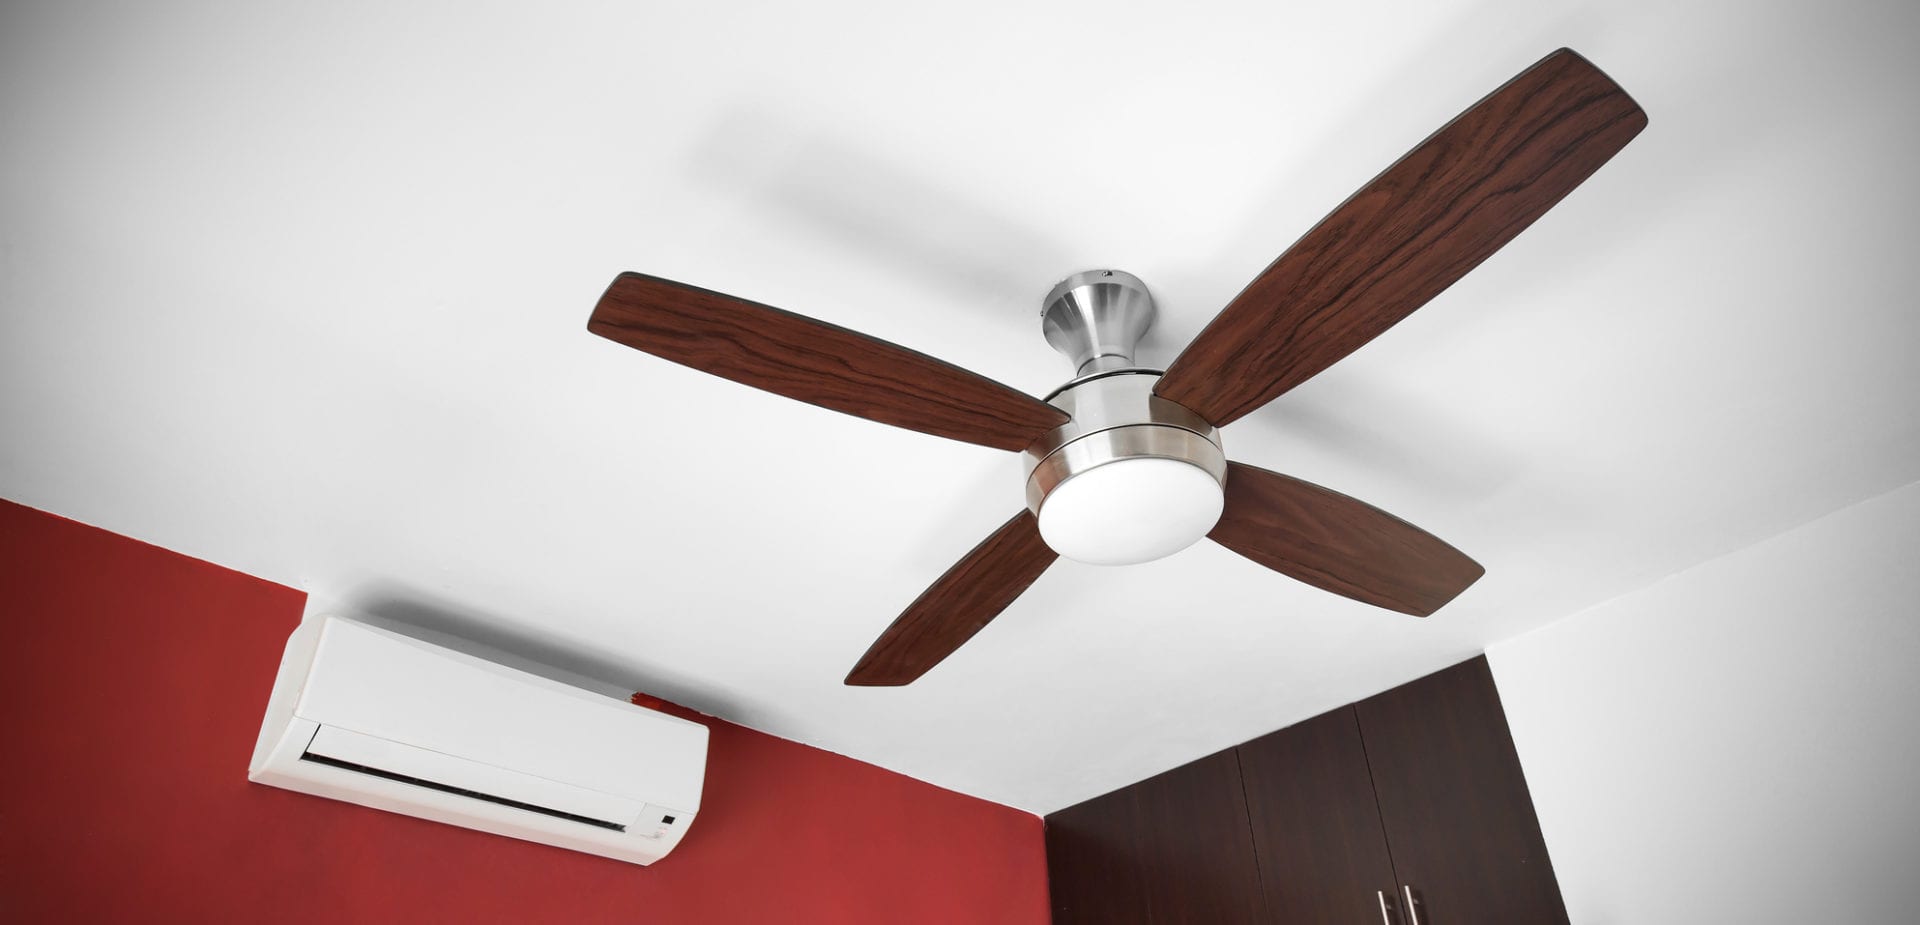 Mister Sparky electricians offer professional ceiling fan installation services.